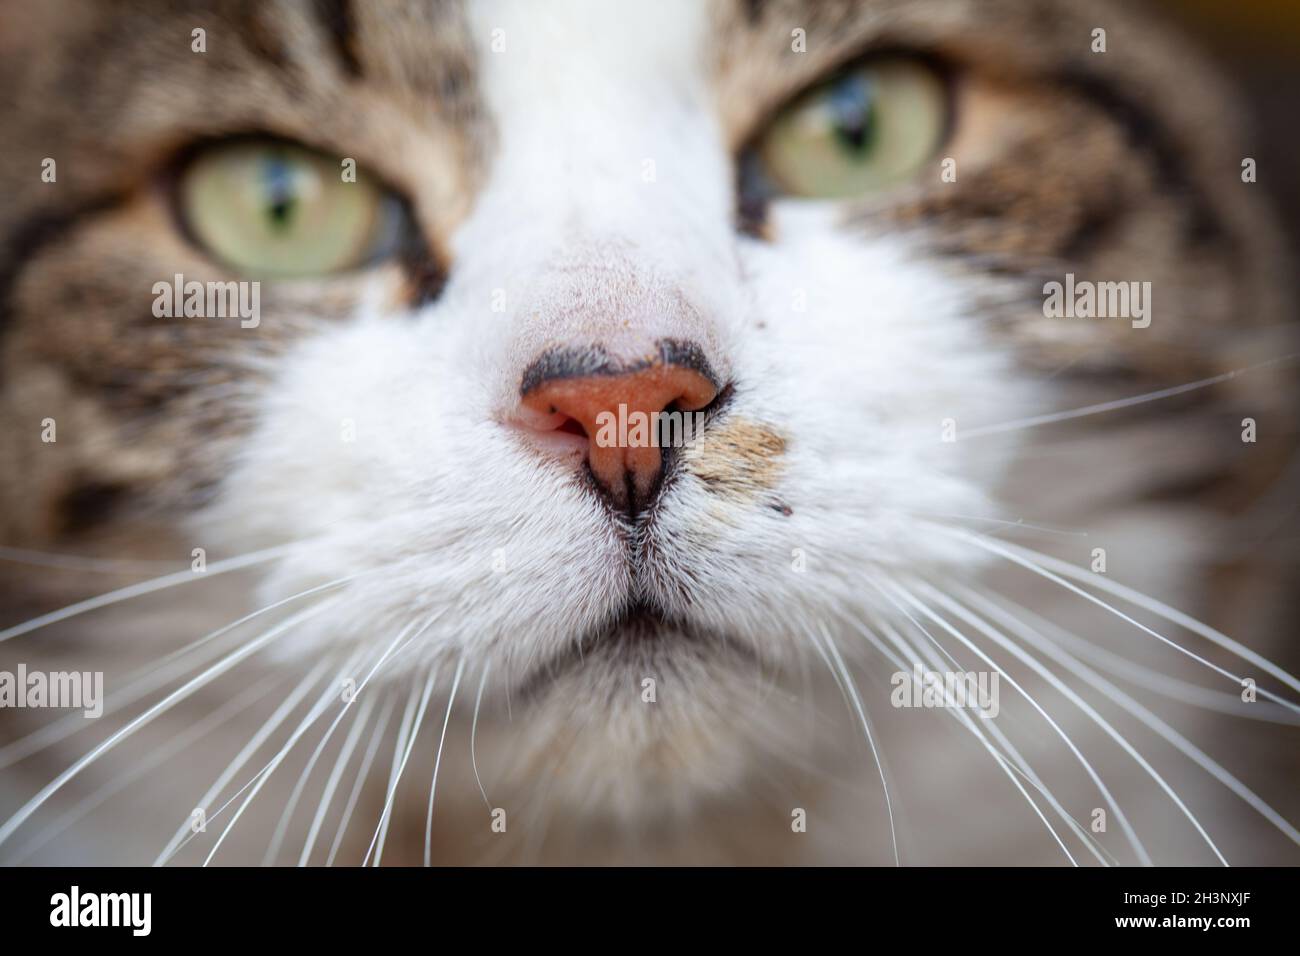 Close up portrait of a tabby and white cat with green eyes Stock Photo